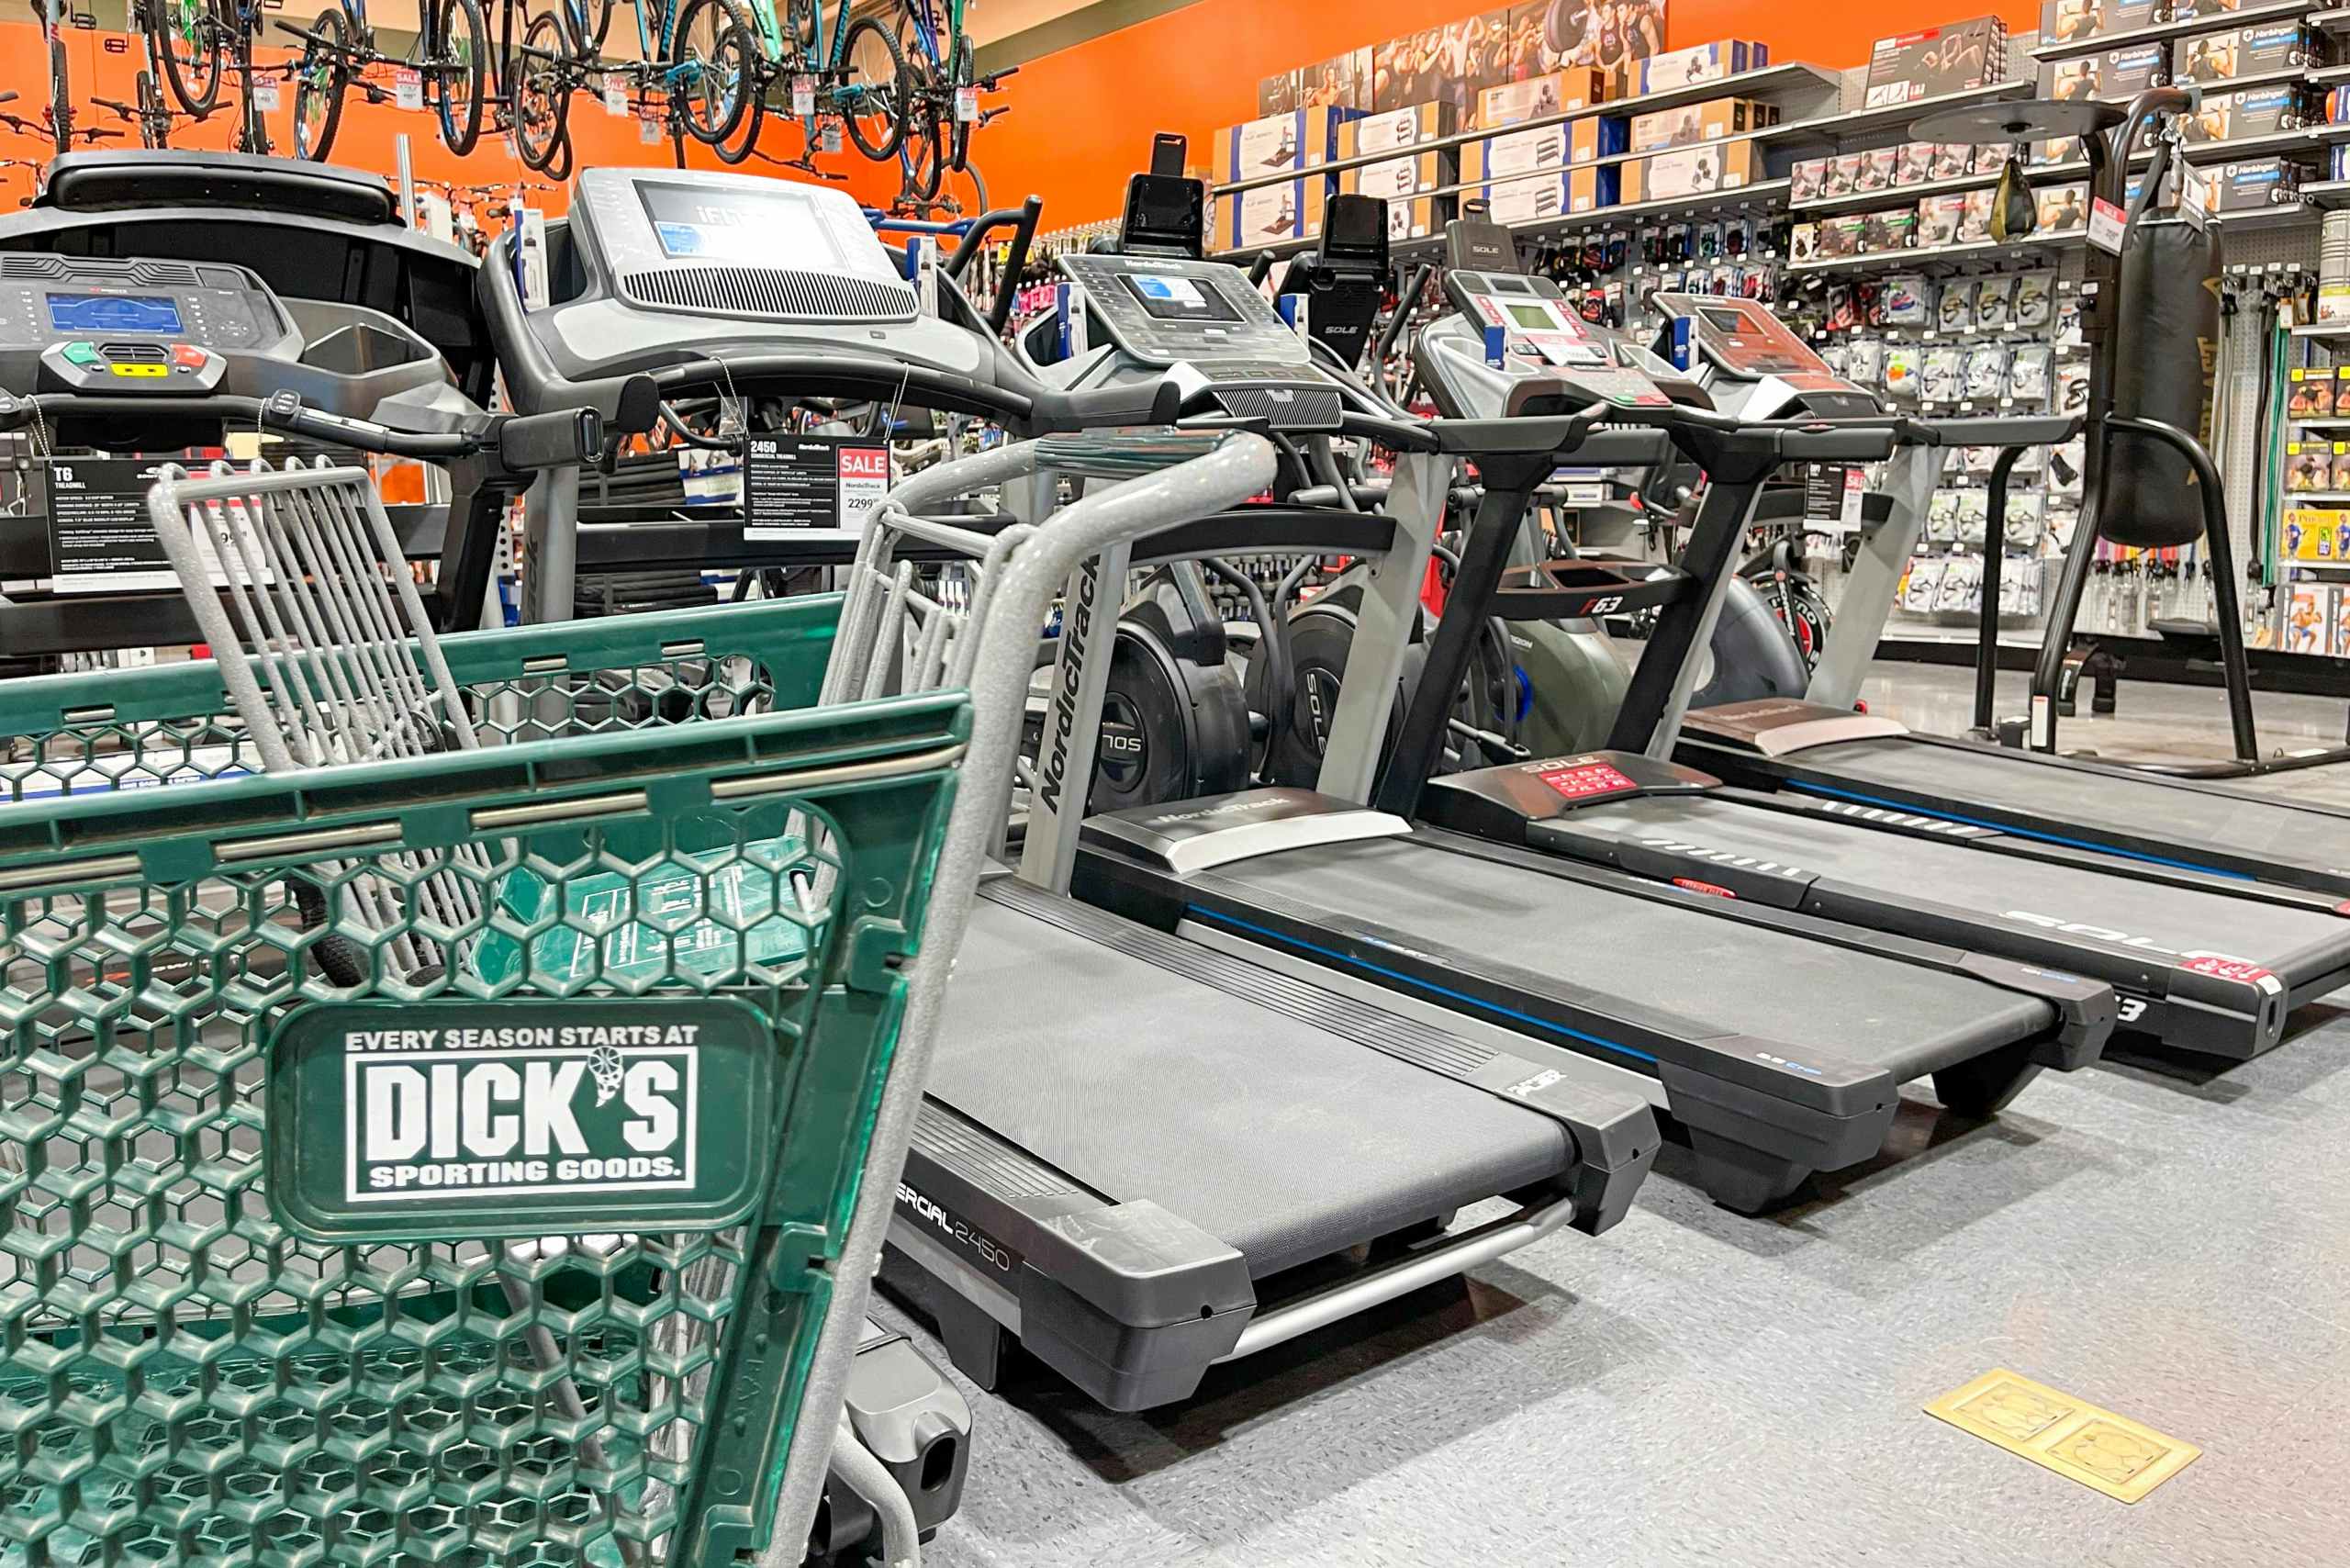 A Dick's Sporting Goods shopping cart parked in front of a row of treadmills on display at Dick's.